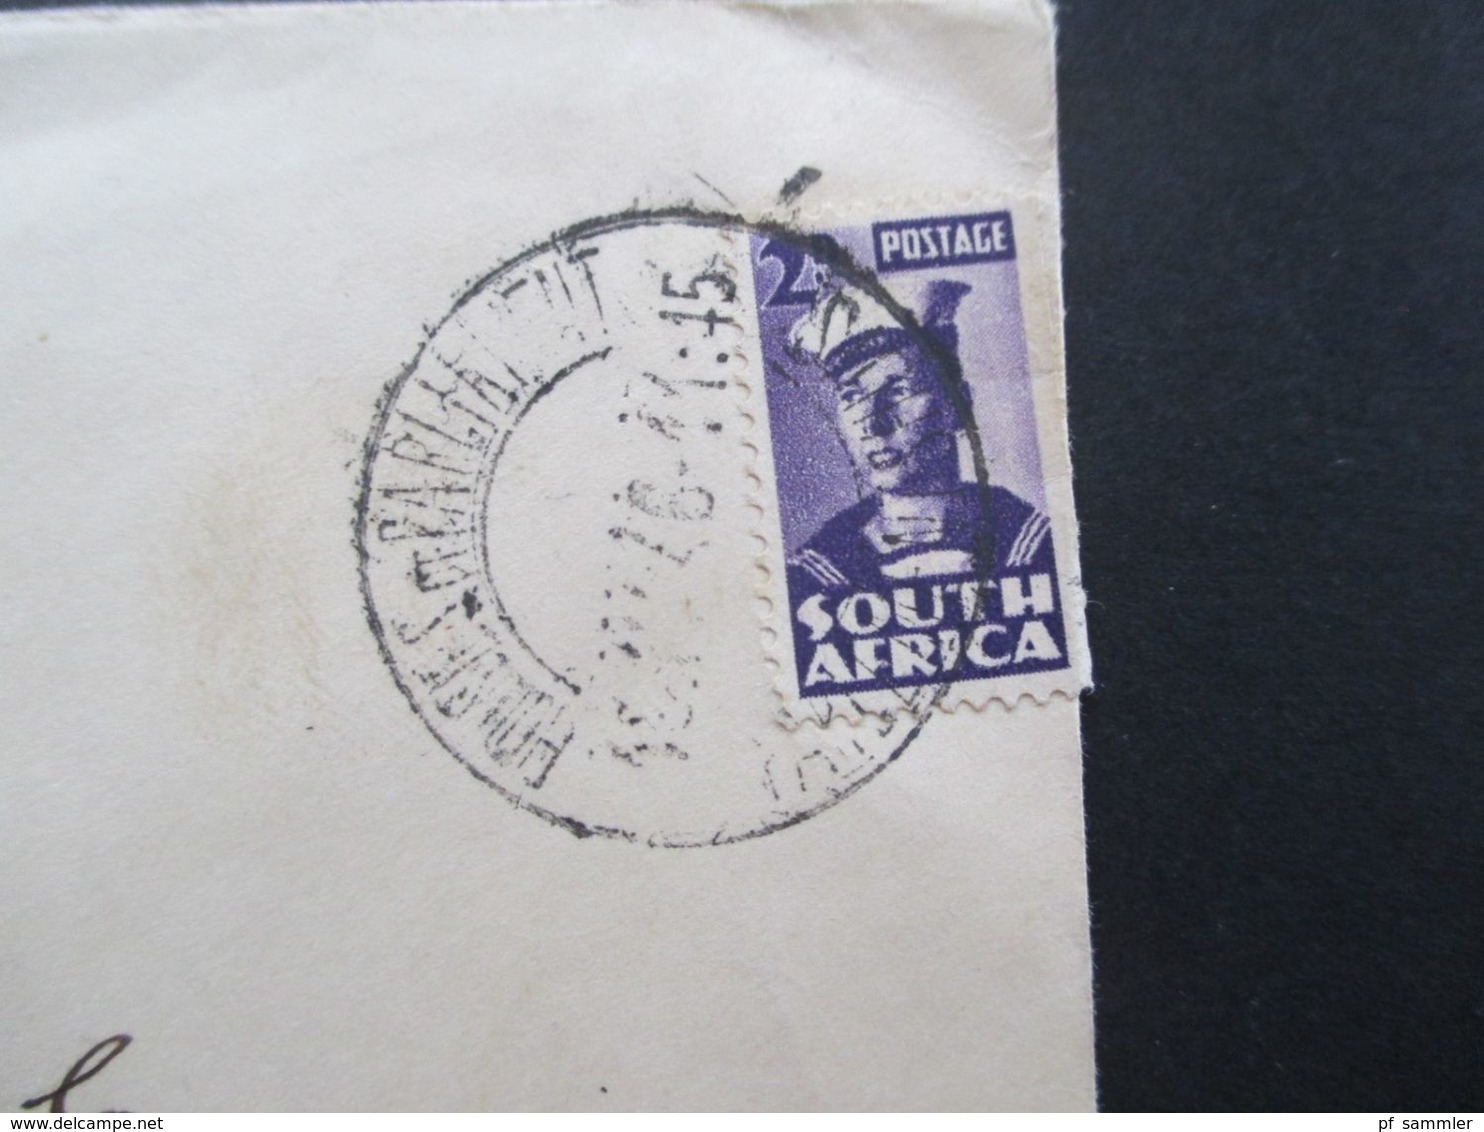 Südafrika 1945 ?!? Beleg Mit Wappen House Of Assembly Cape Town Und Stempel Houses Of Parliament - Storia Postale